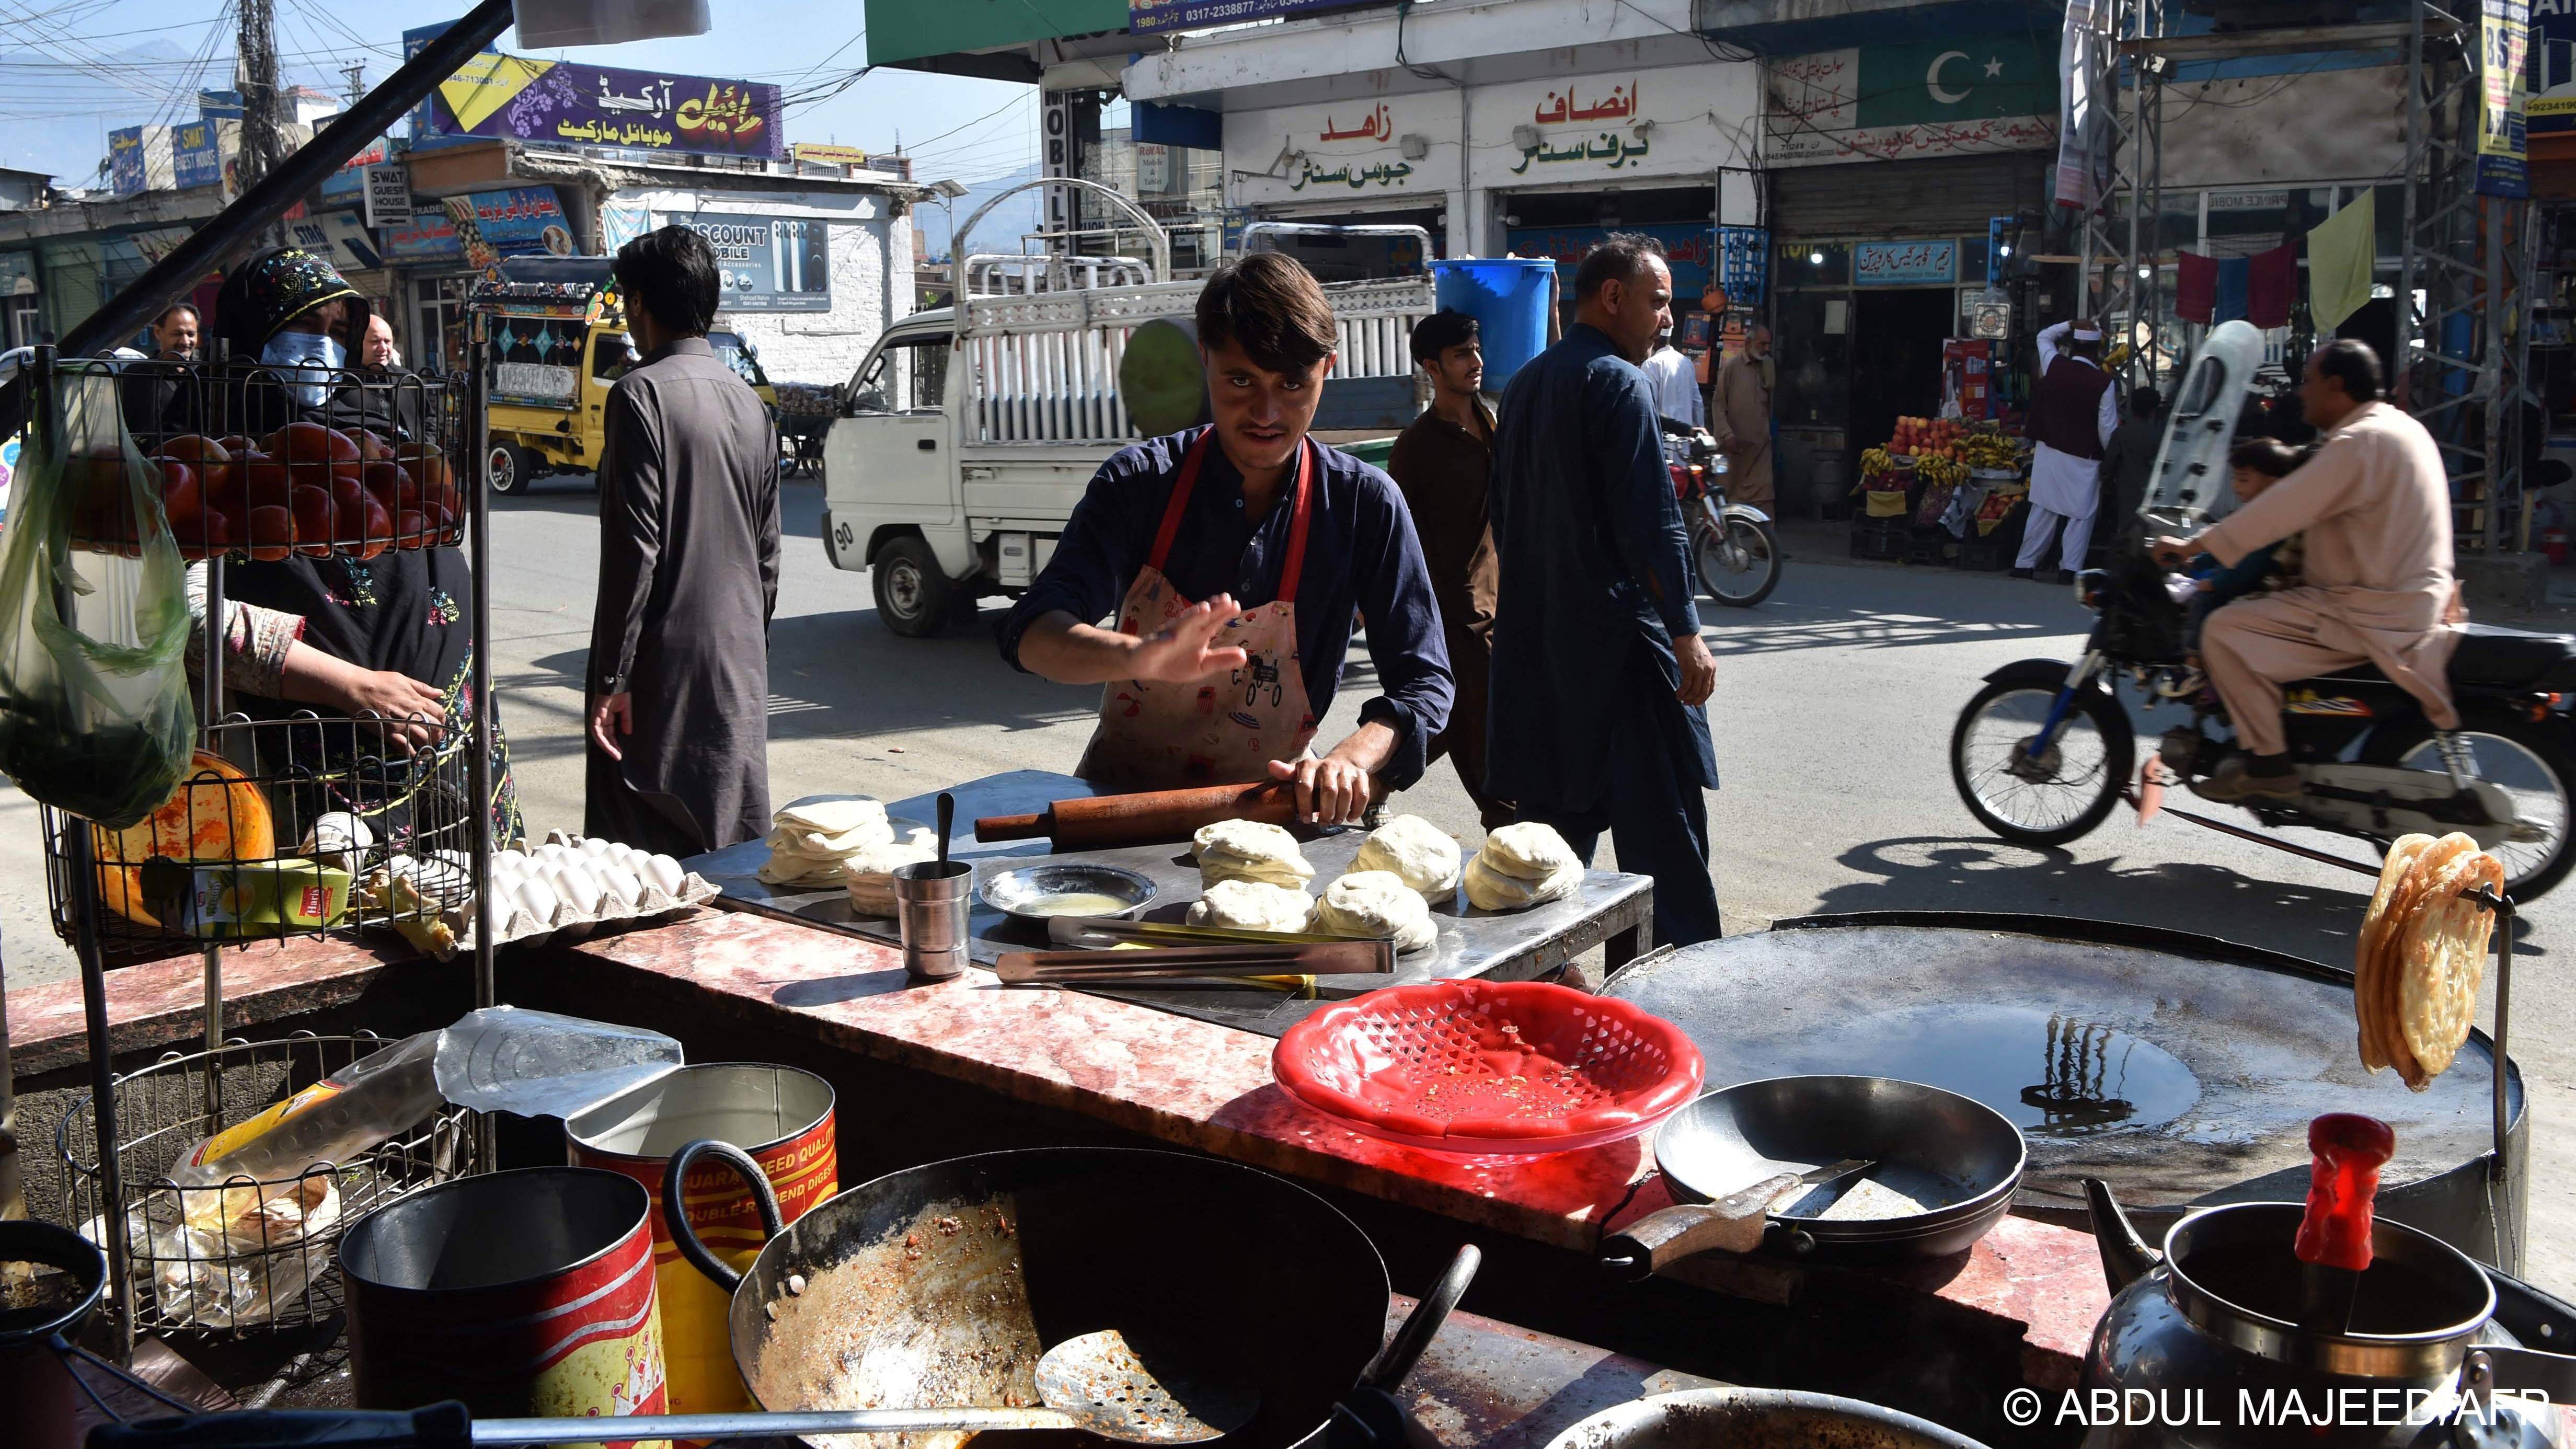 In this picture taken on 25 October 2022, a man prepares bread at a food stall in a market area of Mingora, in the Swat District of Khyber Pakhtunkhwa (photo: Abdul MAJEED / AFP)